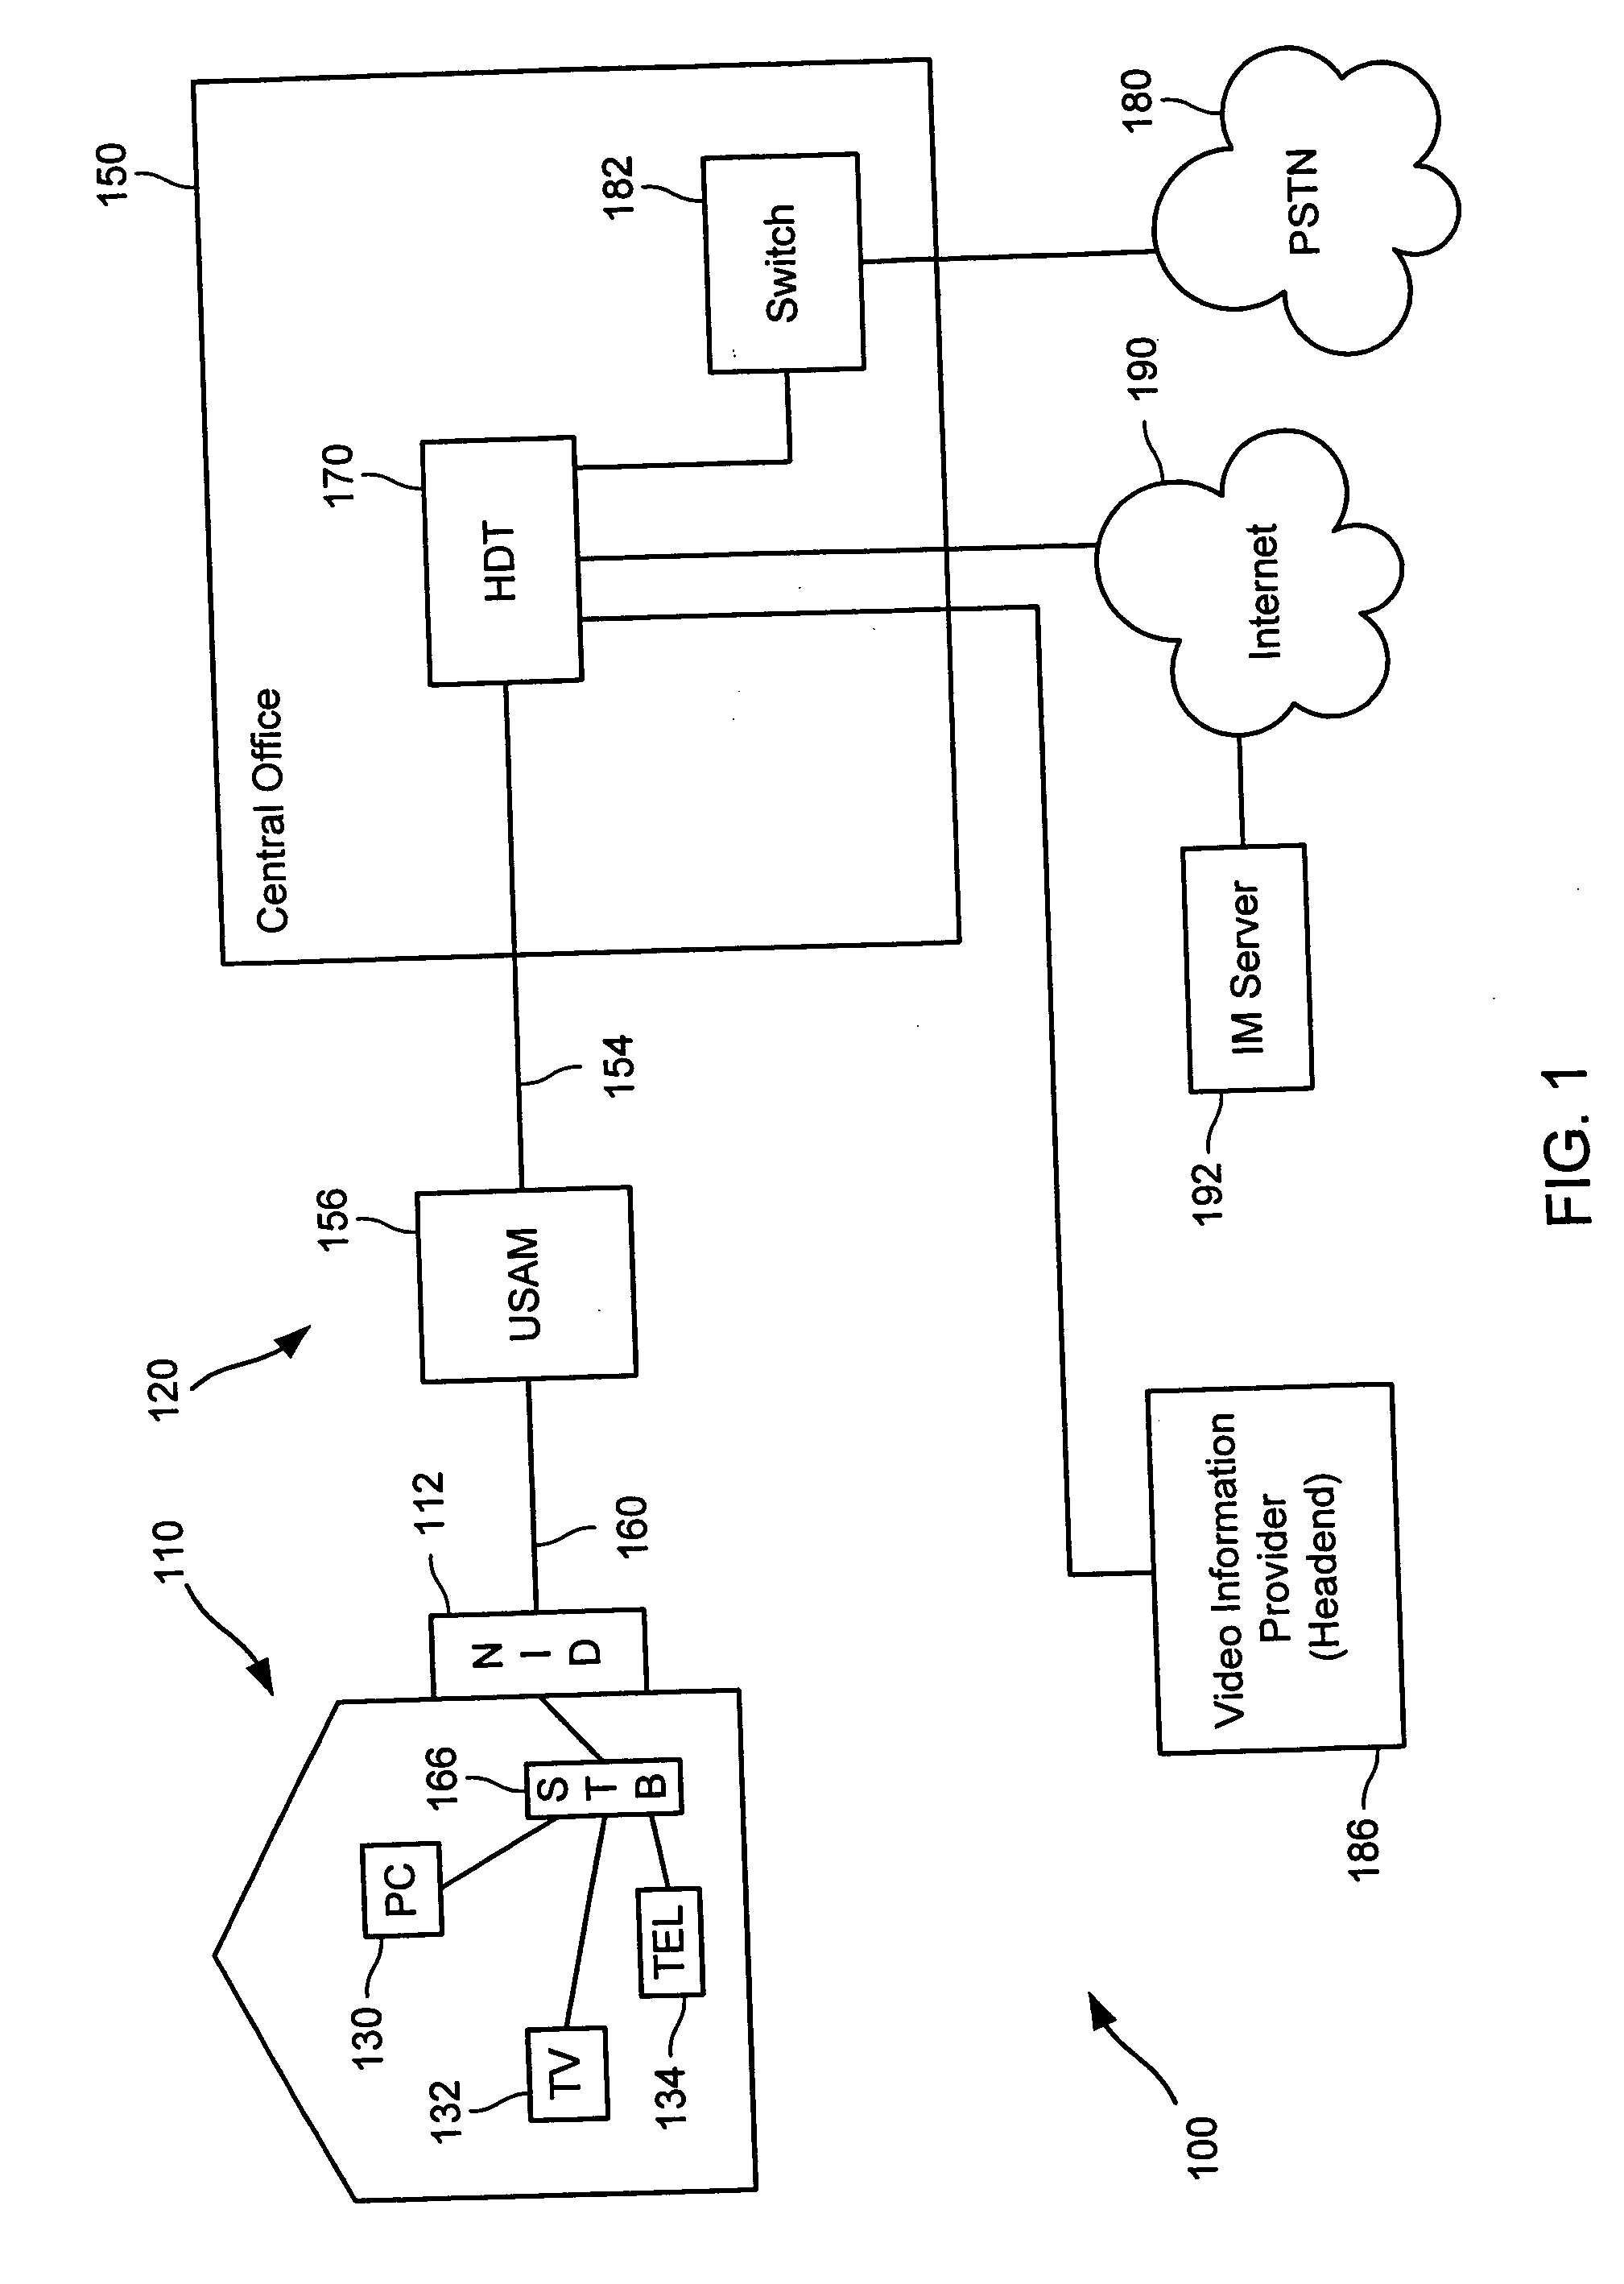 System and method for simultaneously displaying video programming and instant messaging